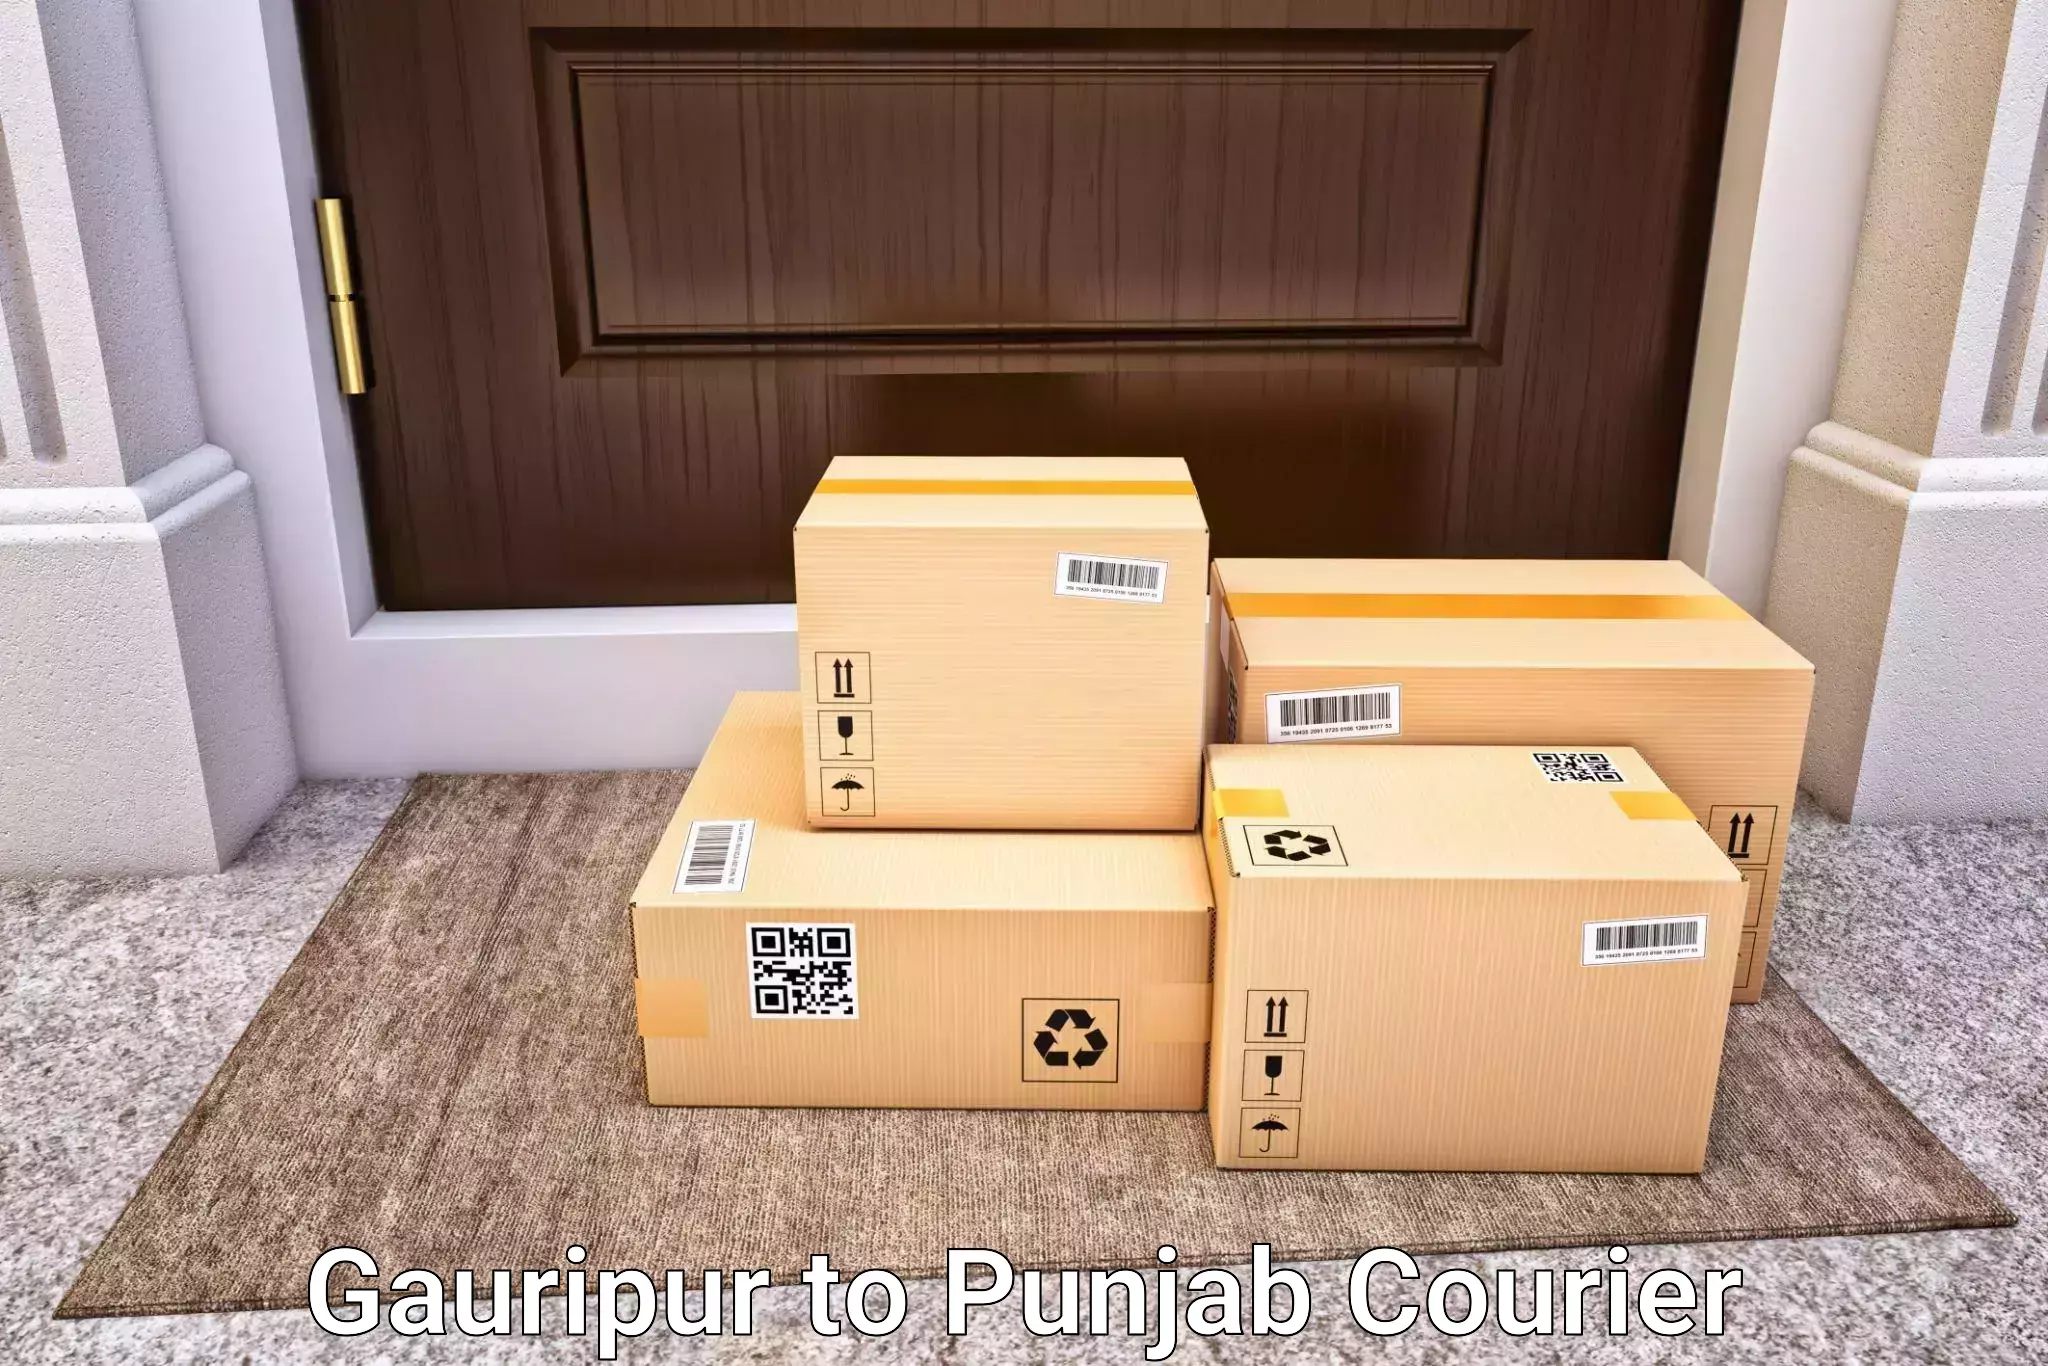 Luggage delivery providers Gauripur to Bathinda